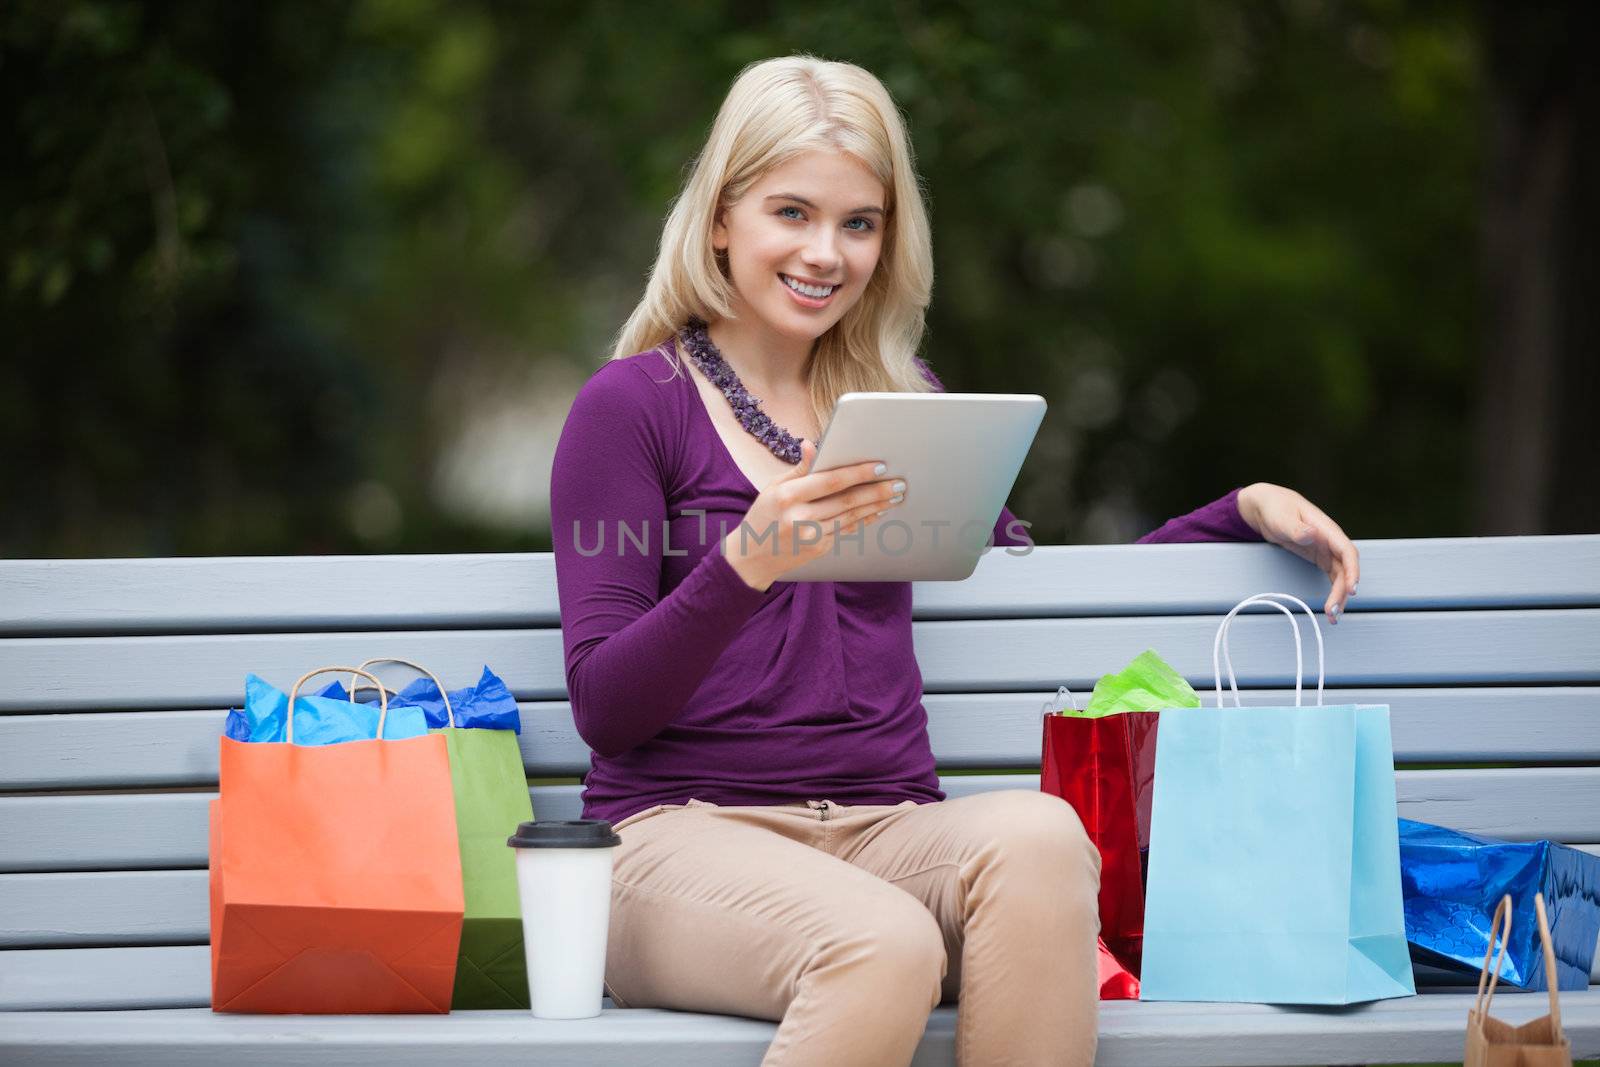 Woman With Shopping Bags Using Tablet PC Outdoors by leaf